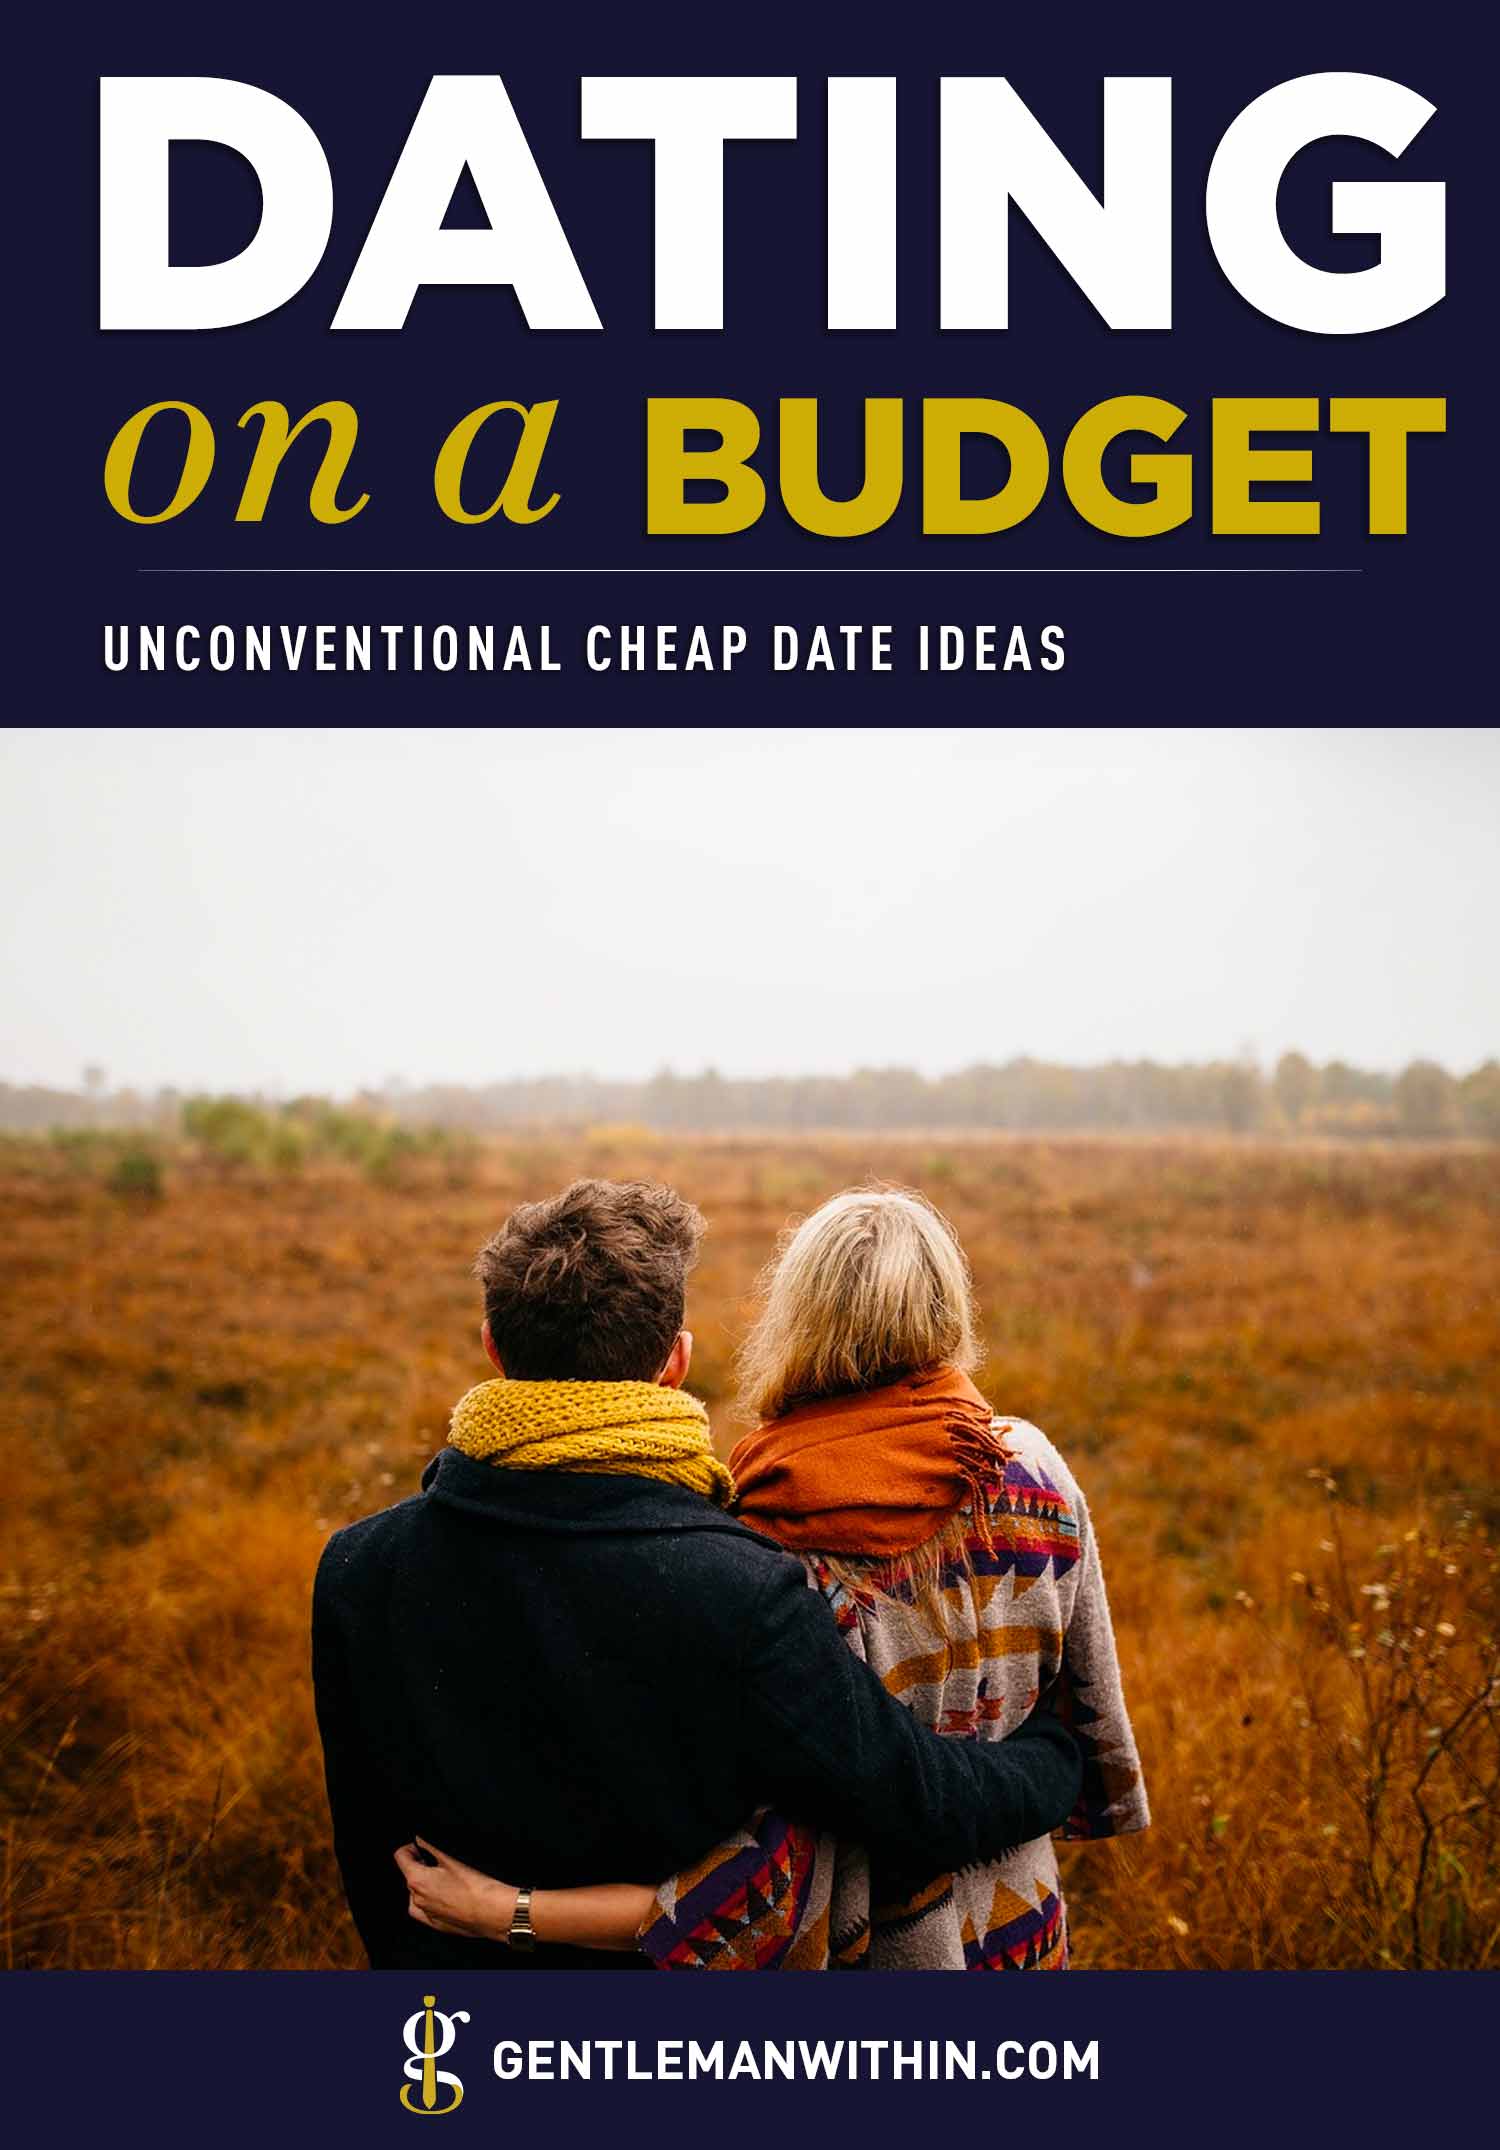 Best Cheap Date Ideas: Have a Great Time on a Tight Budget